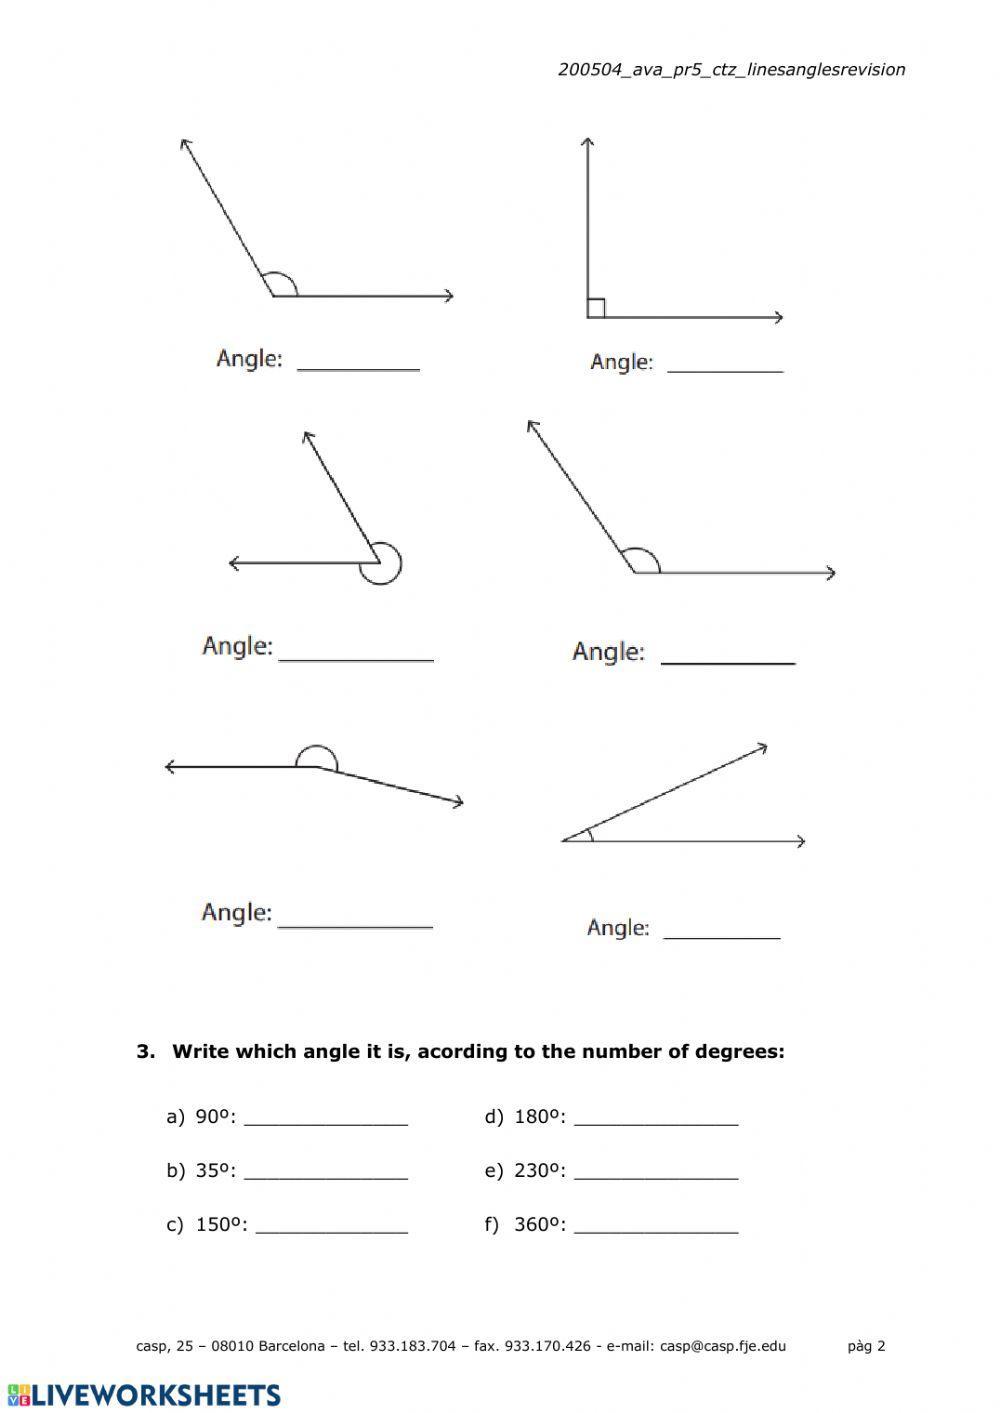 Revision lines and angles